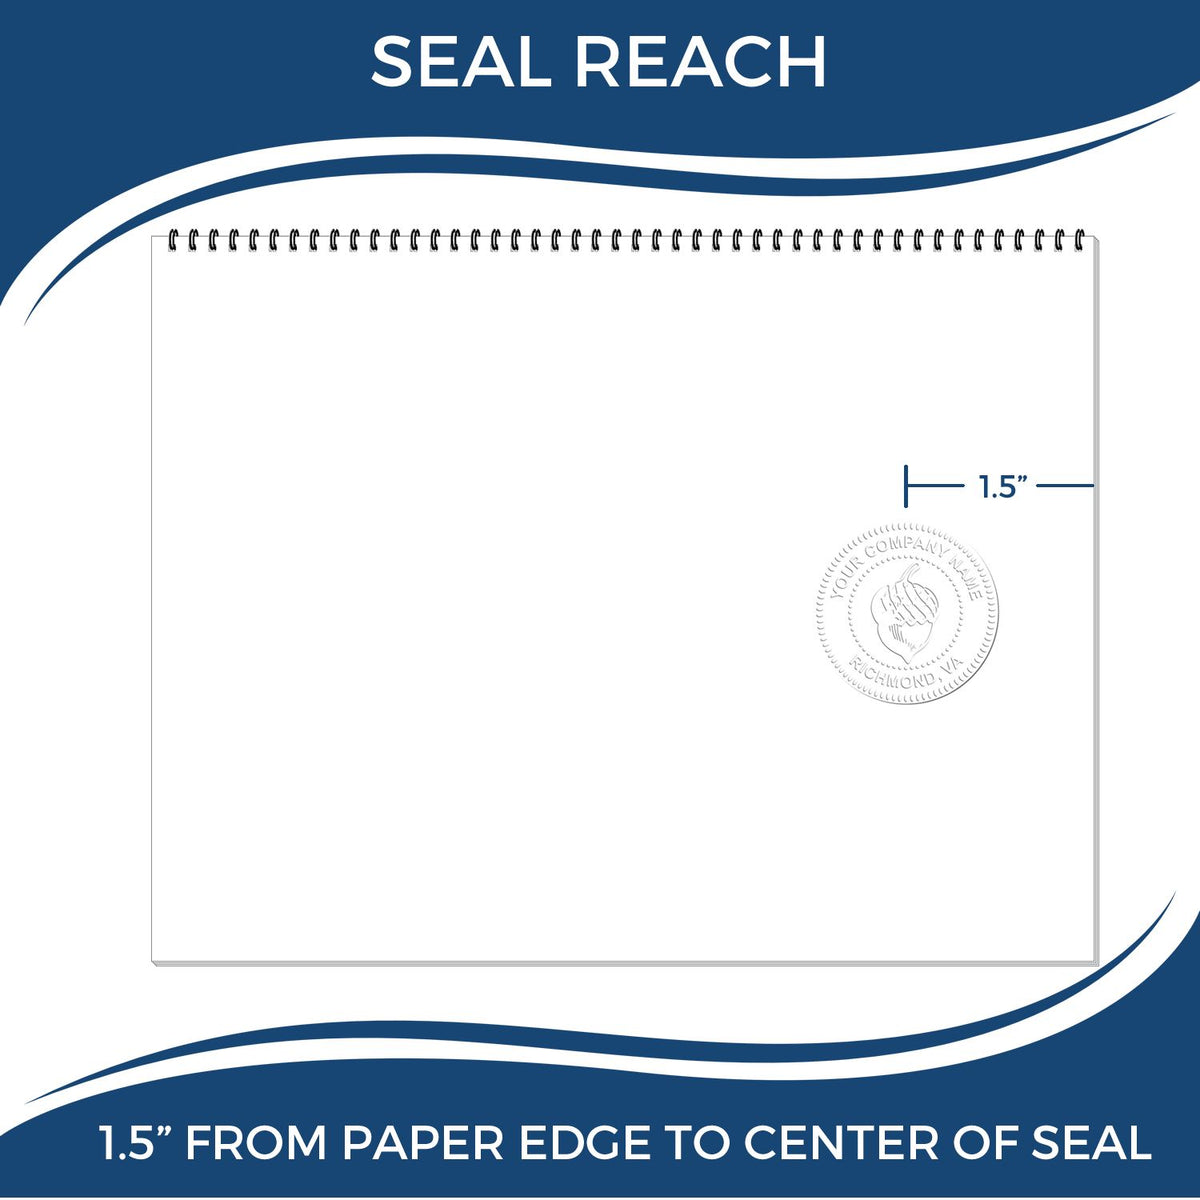 An infographic showing the seal reach which is represented by a ruler and a miniature seal image of the Hybrid Iowa Geologist Seal